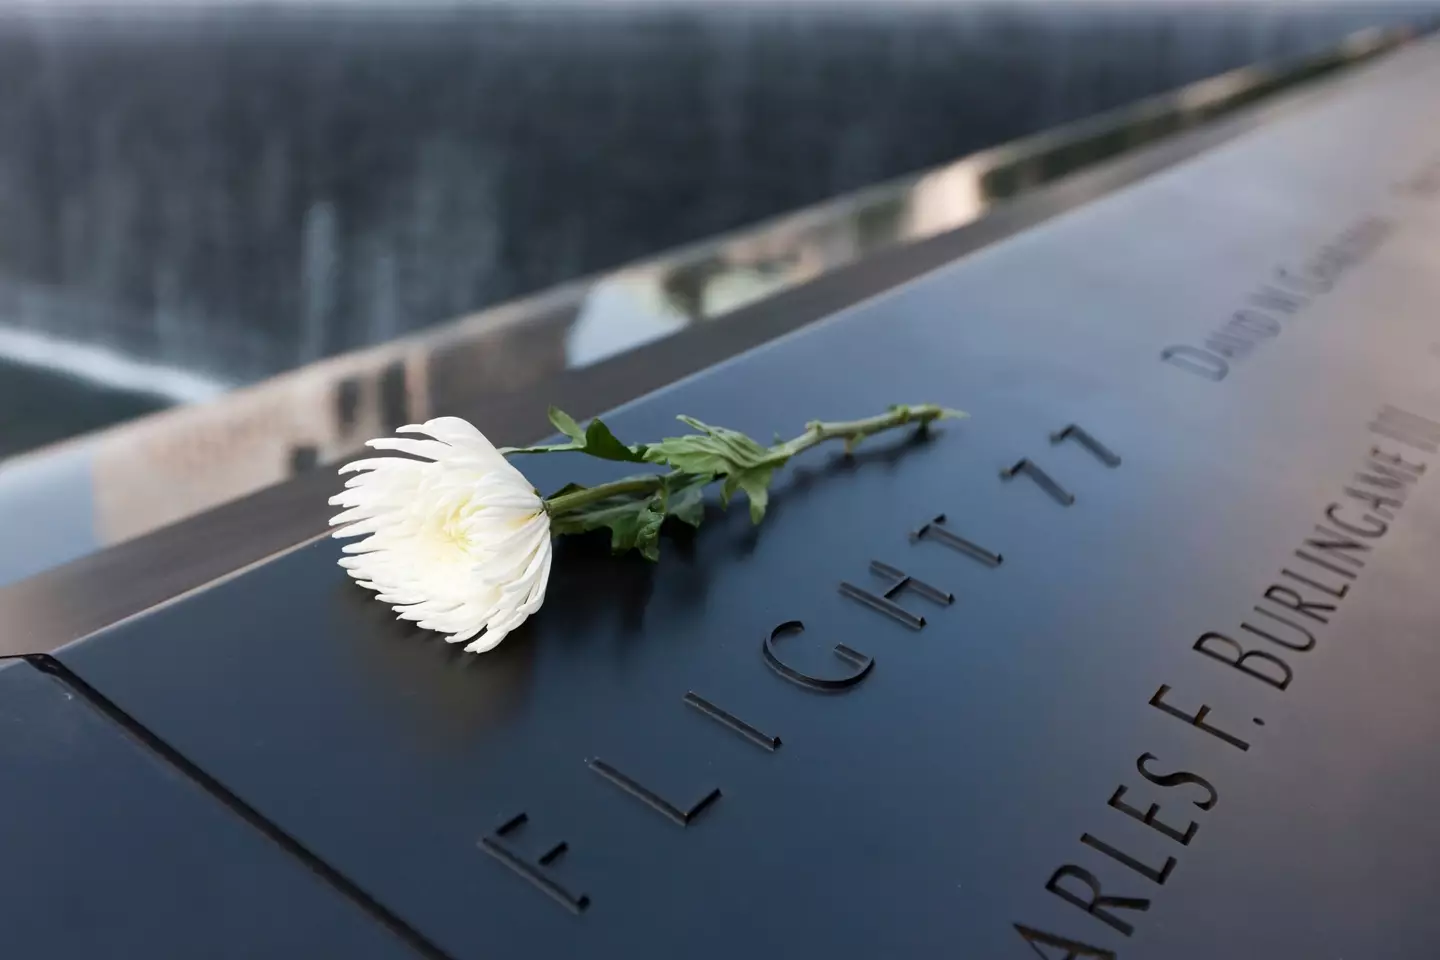 There is another memorial to the victims of Flight 77 at the National September 11 memorial in New York.